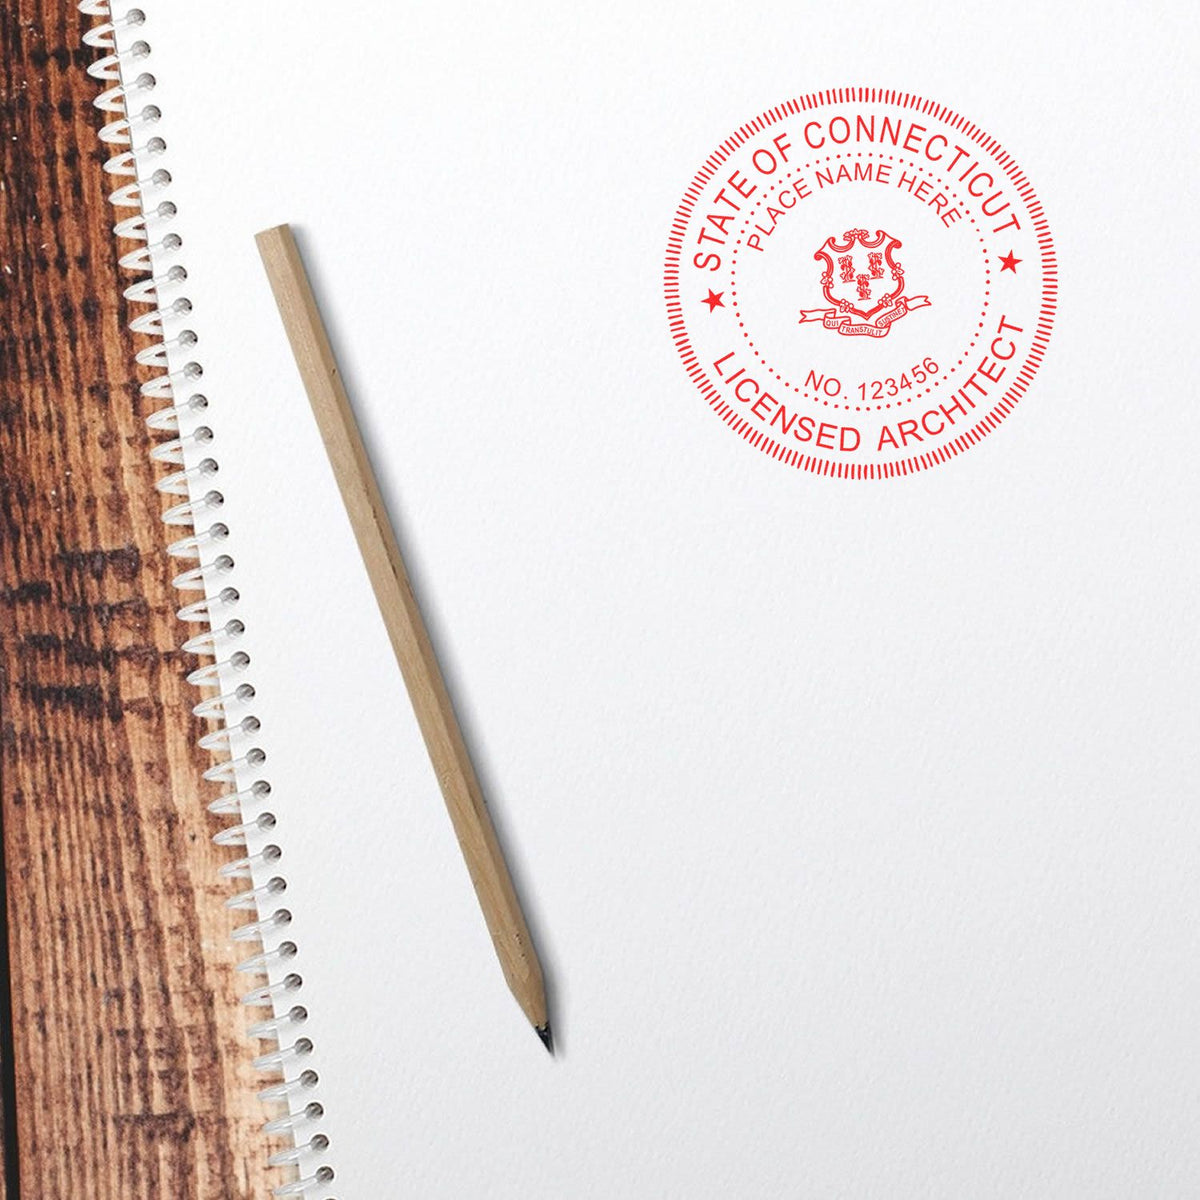 The Slim Pre-Inked Connecticut Architect Seal Stamp stamp impression comes to life with a crisp, detailed photo on paper - showcasing true professional quality.